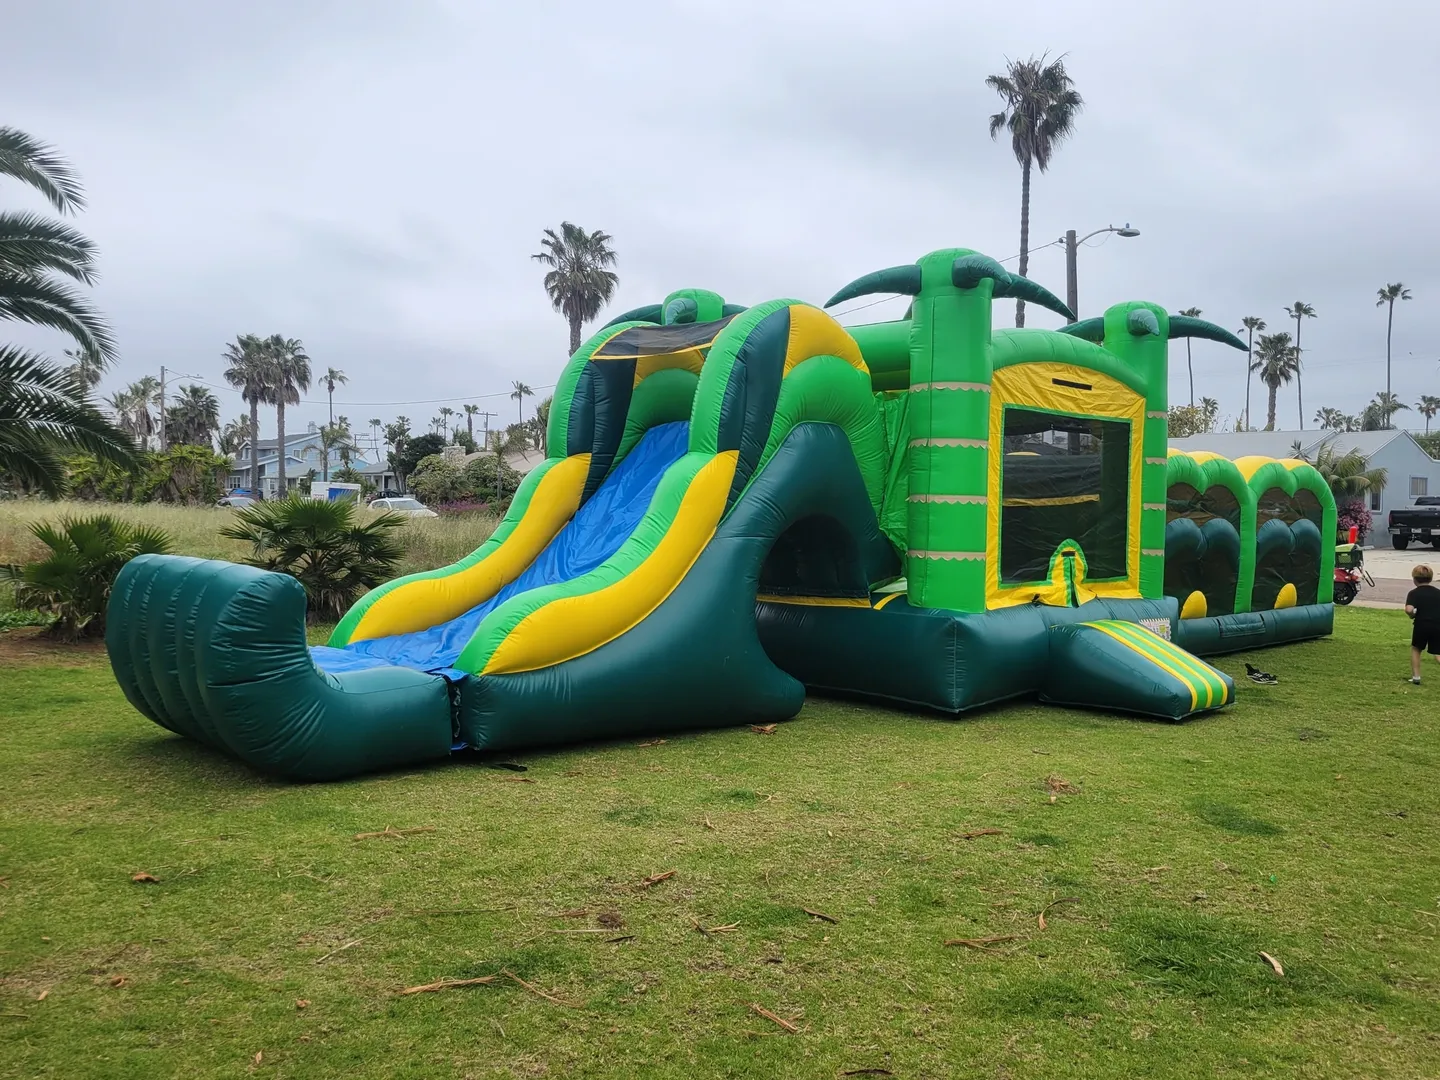 A green and yellow inflatable slide in the grass.